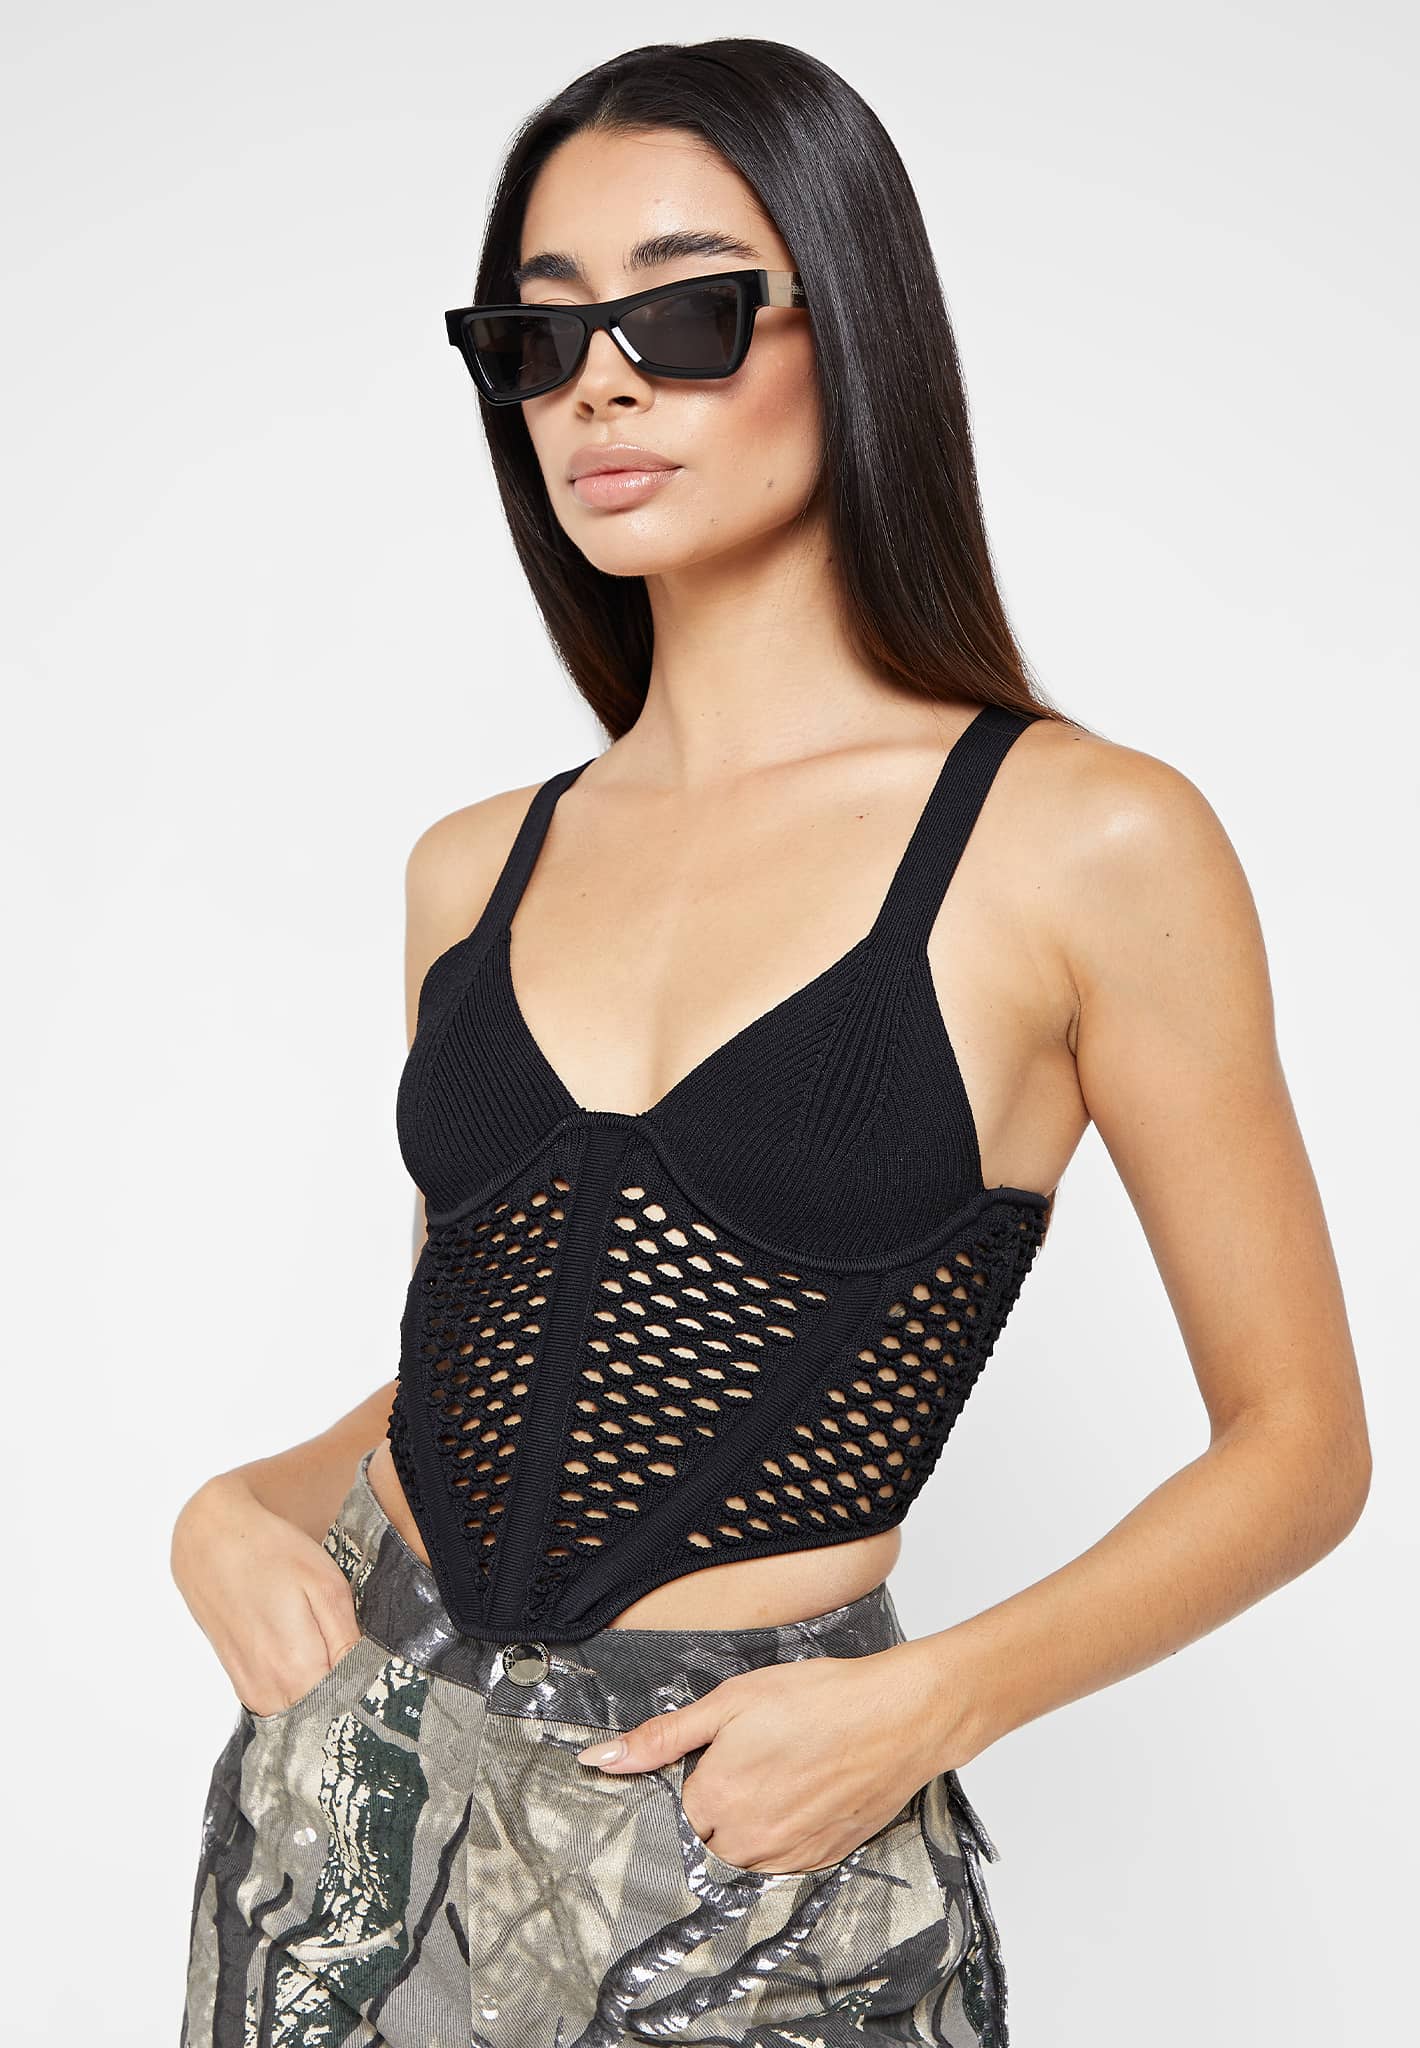 Kyana Corset Top in Black with White Stitch